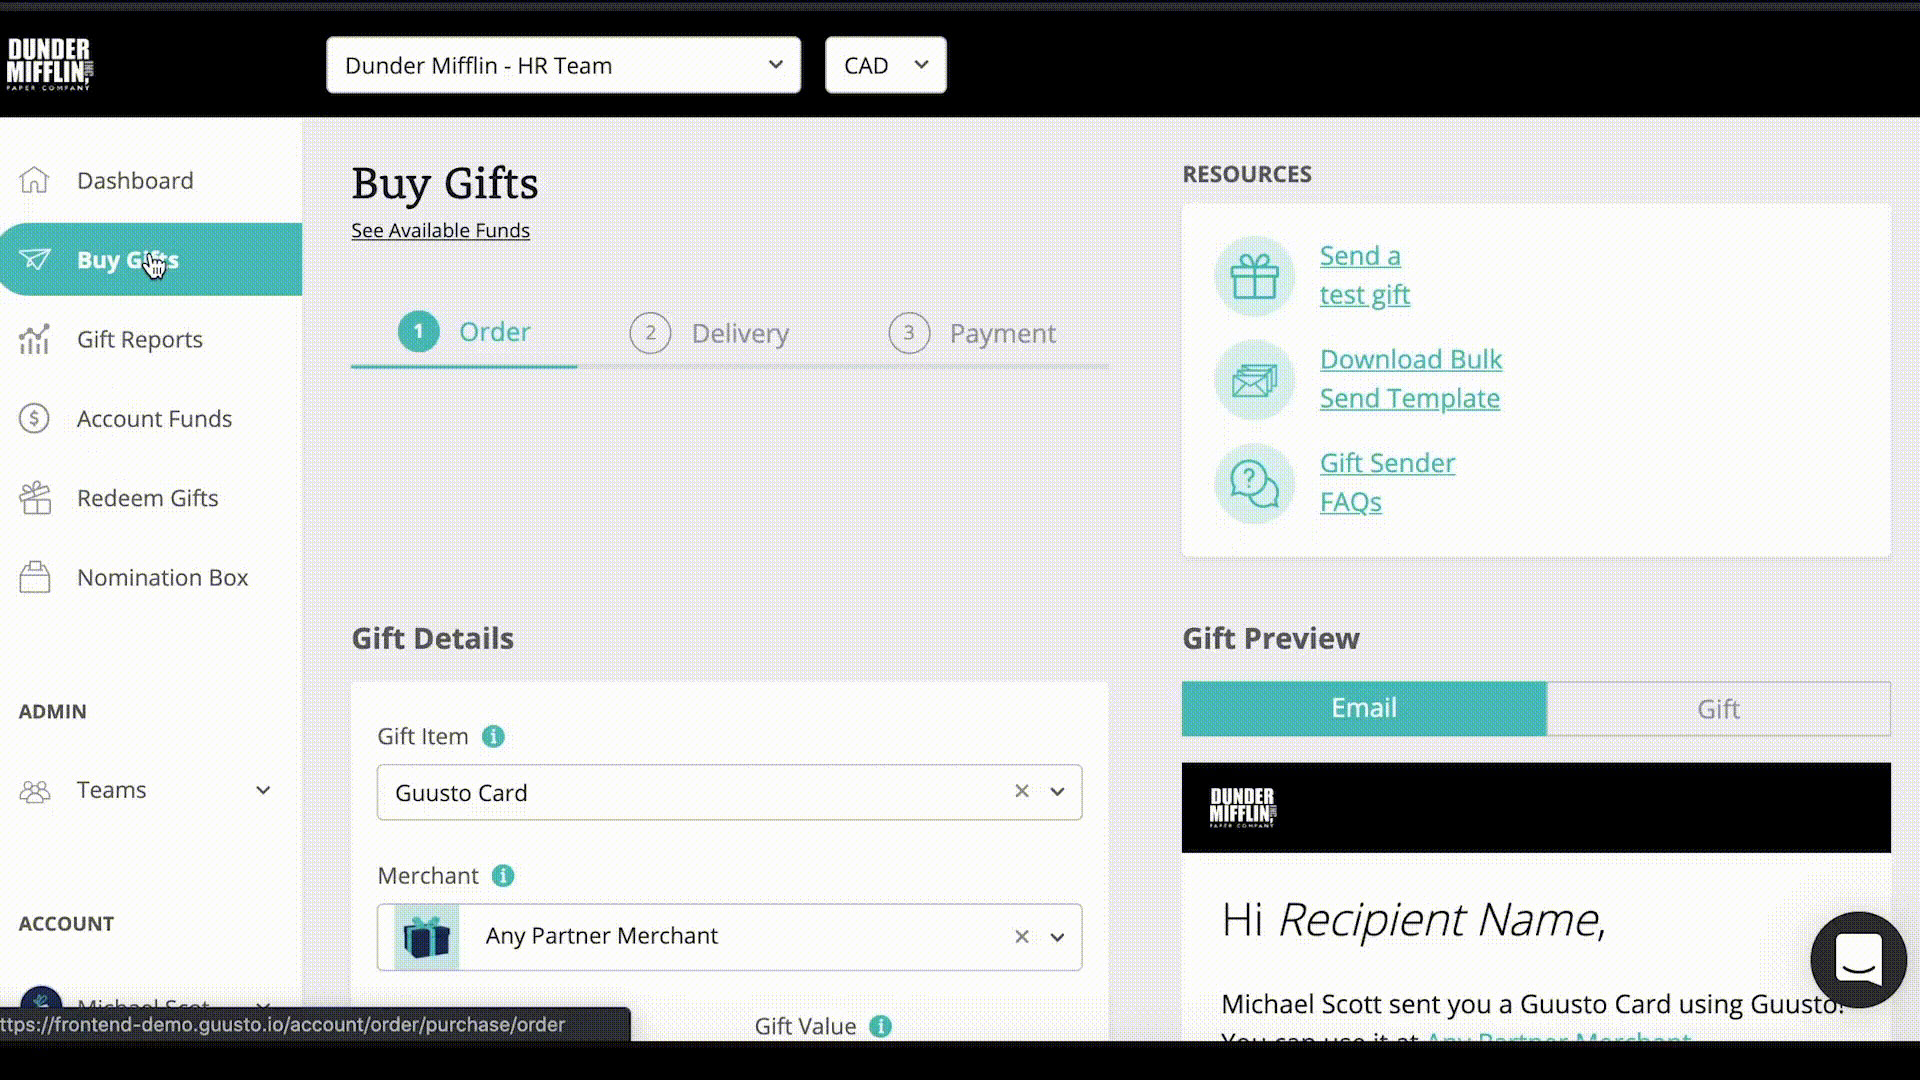 Our reviewer took screenshot of Guusto Employee Reward Programs's dashboard during the review